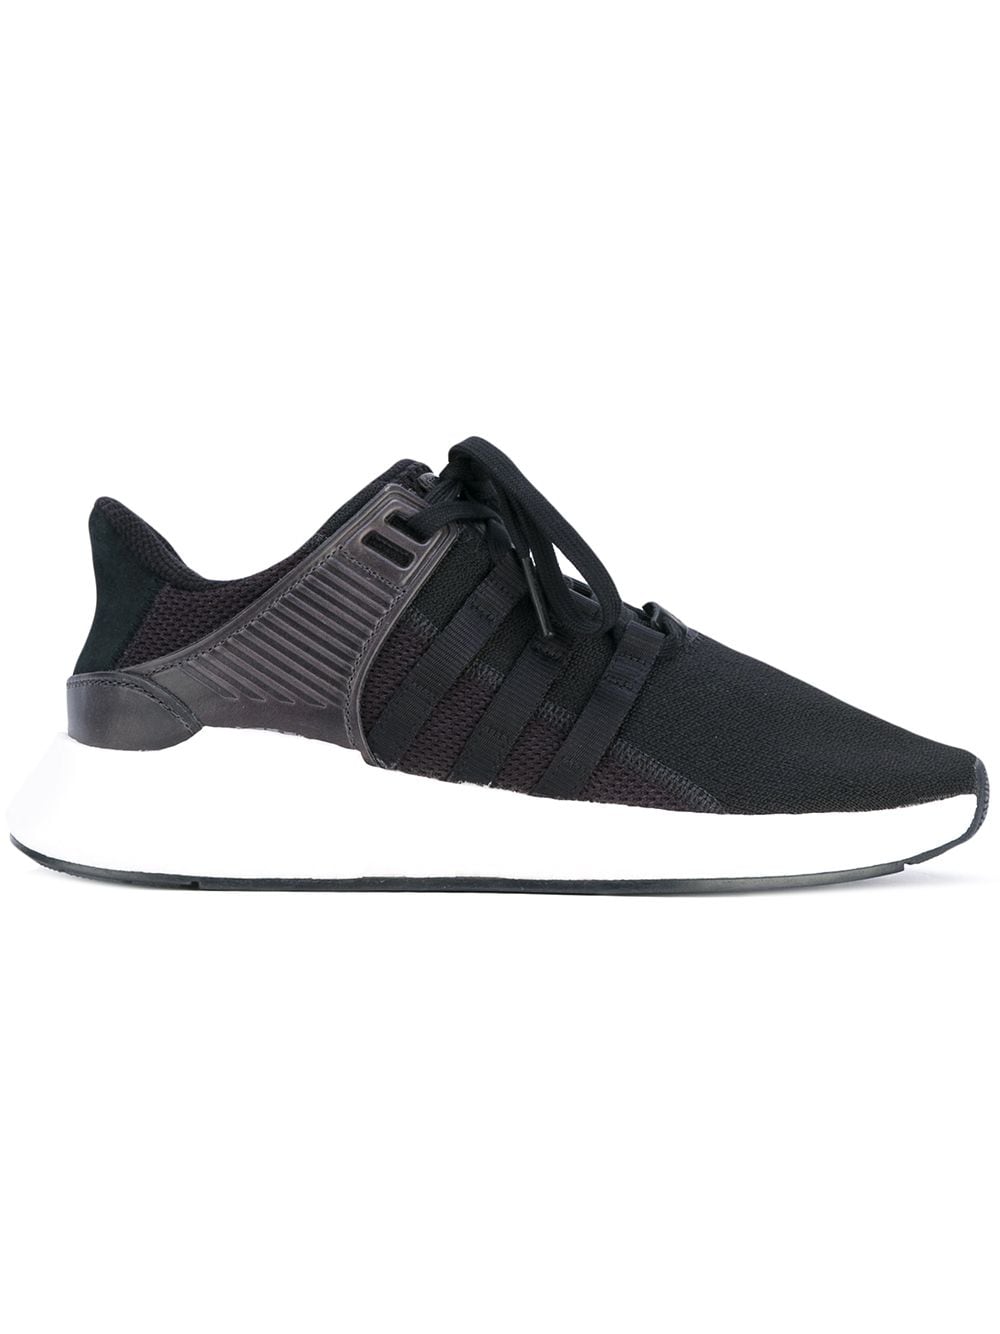 adidas eqt support homme